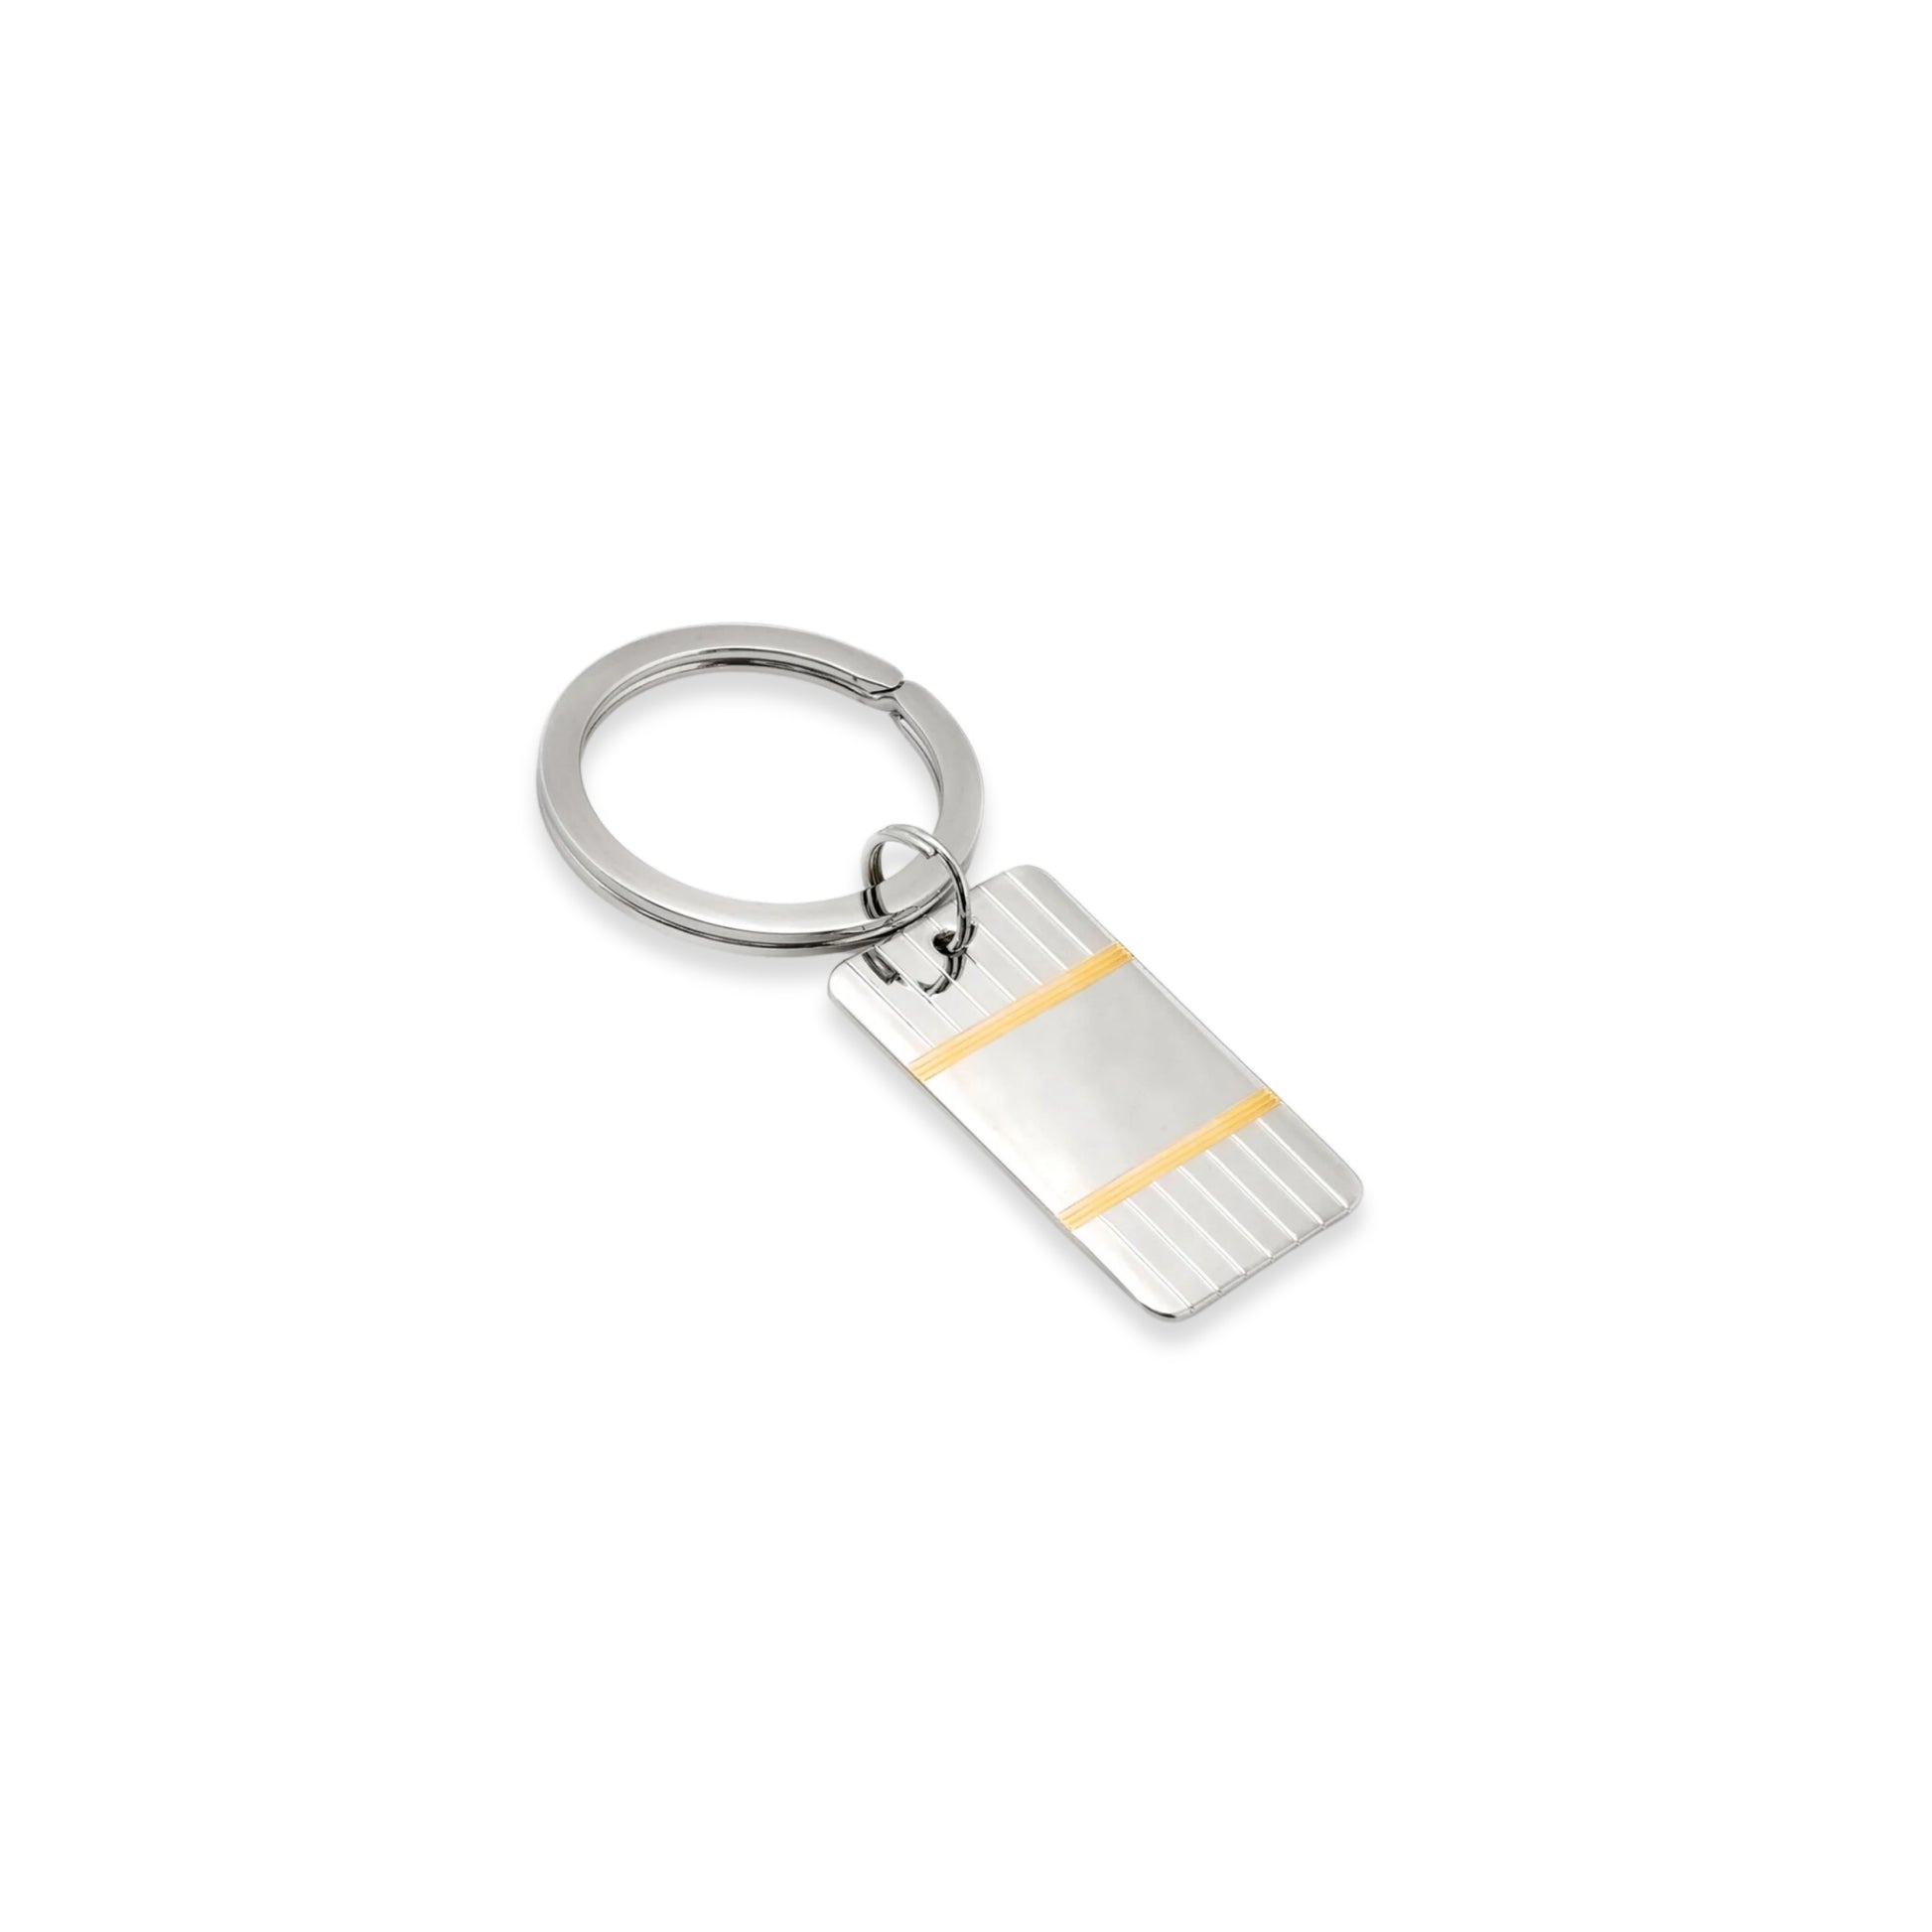  Sterling Silver and Gold Plate Rectangular Key Ring with Engine Turned Linear Design